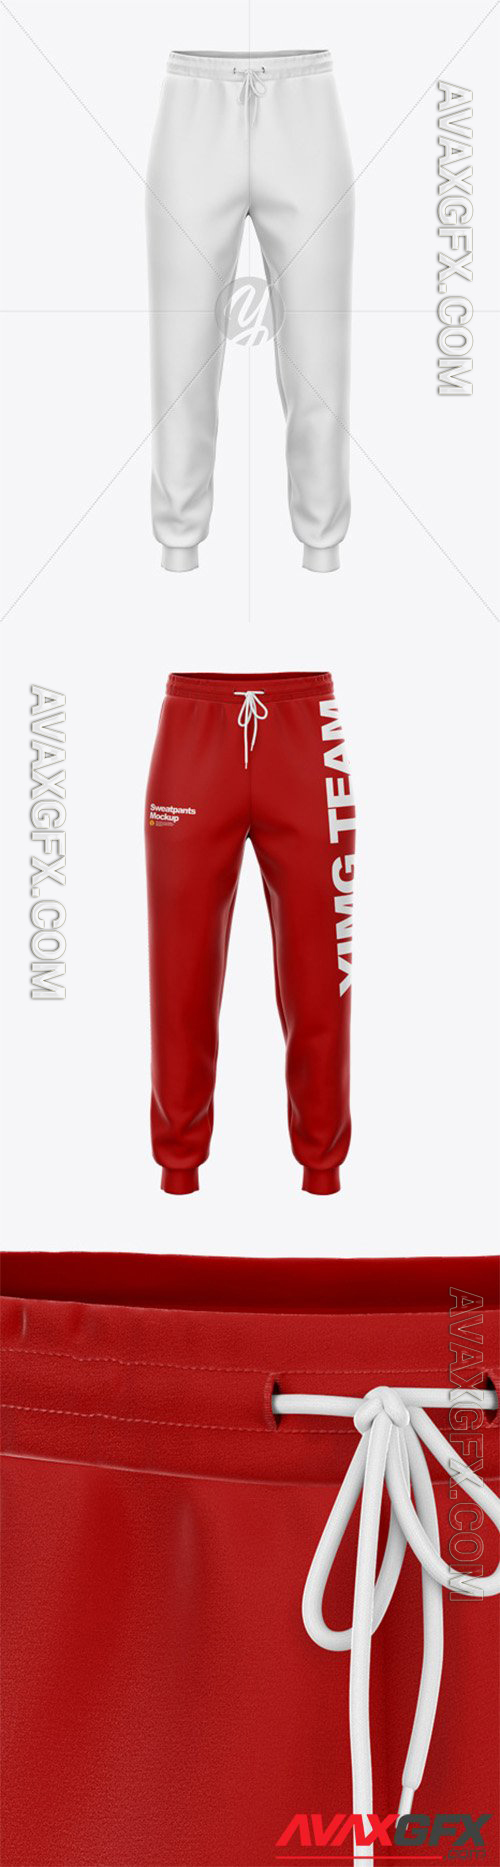 Sweatpants with Cord - Front View 51281